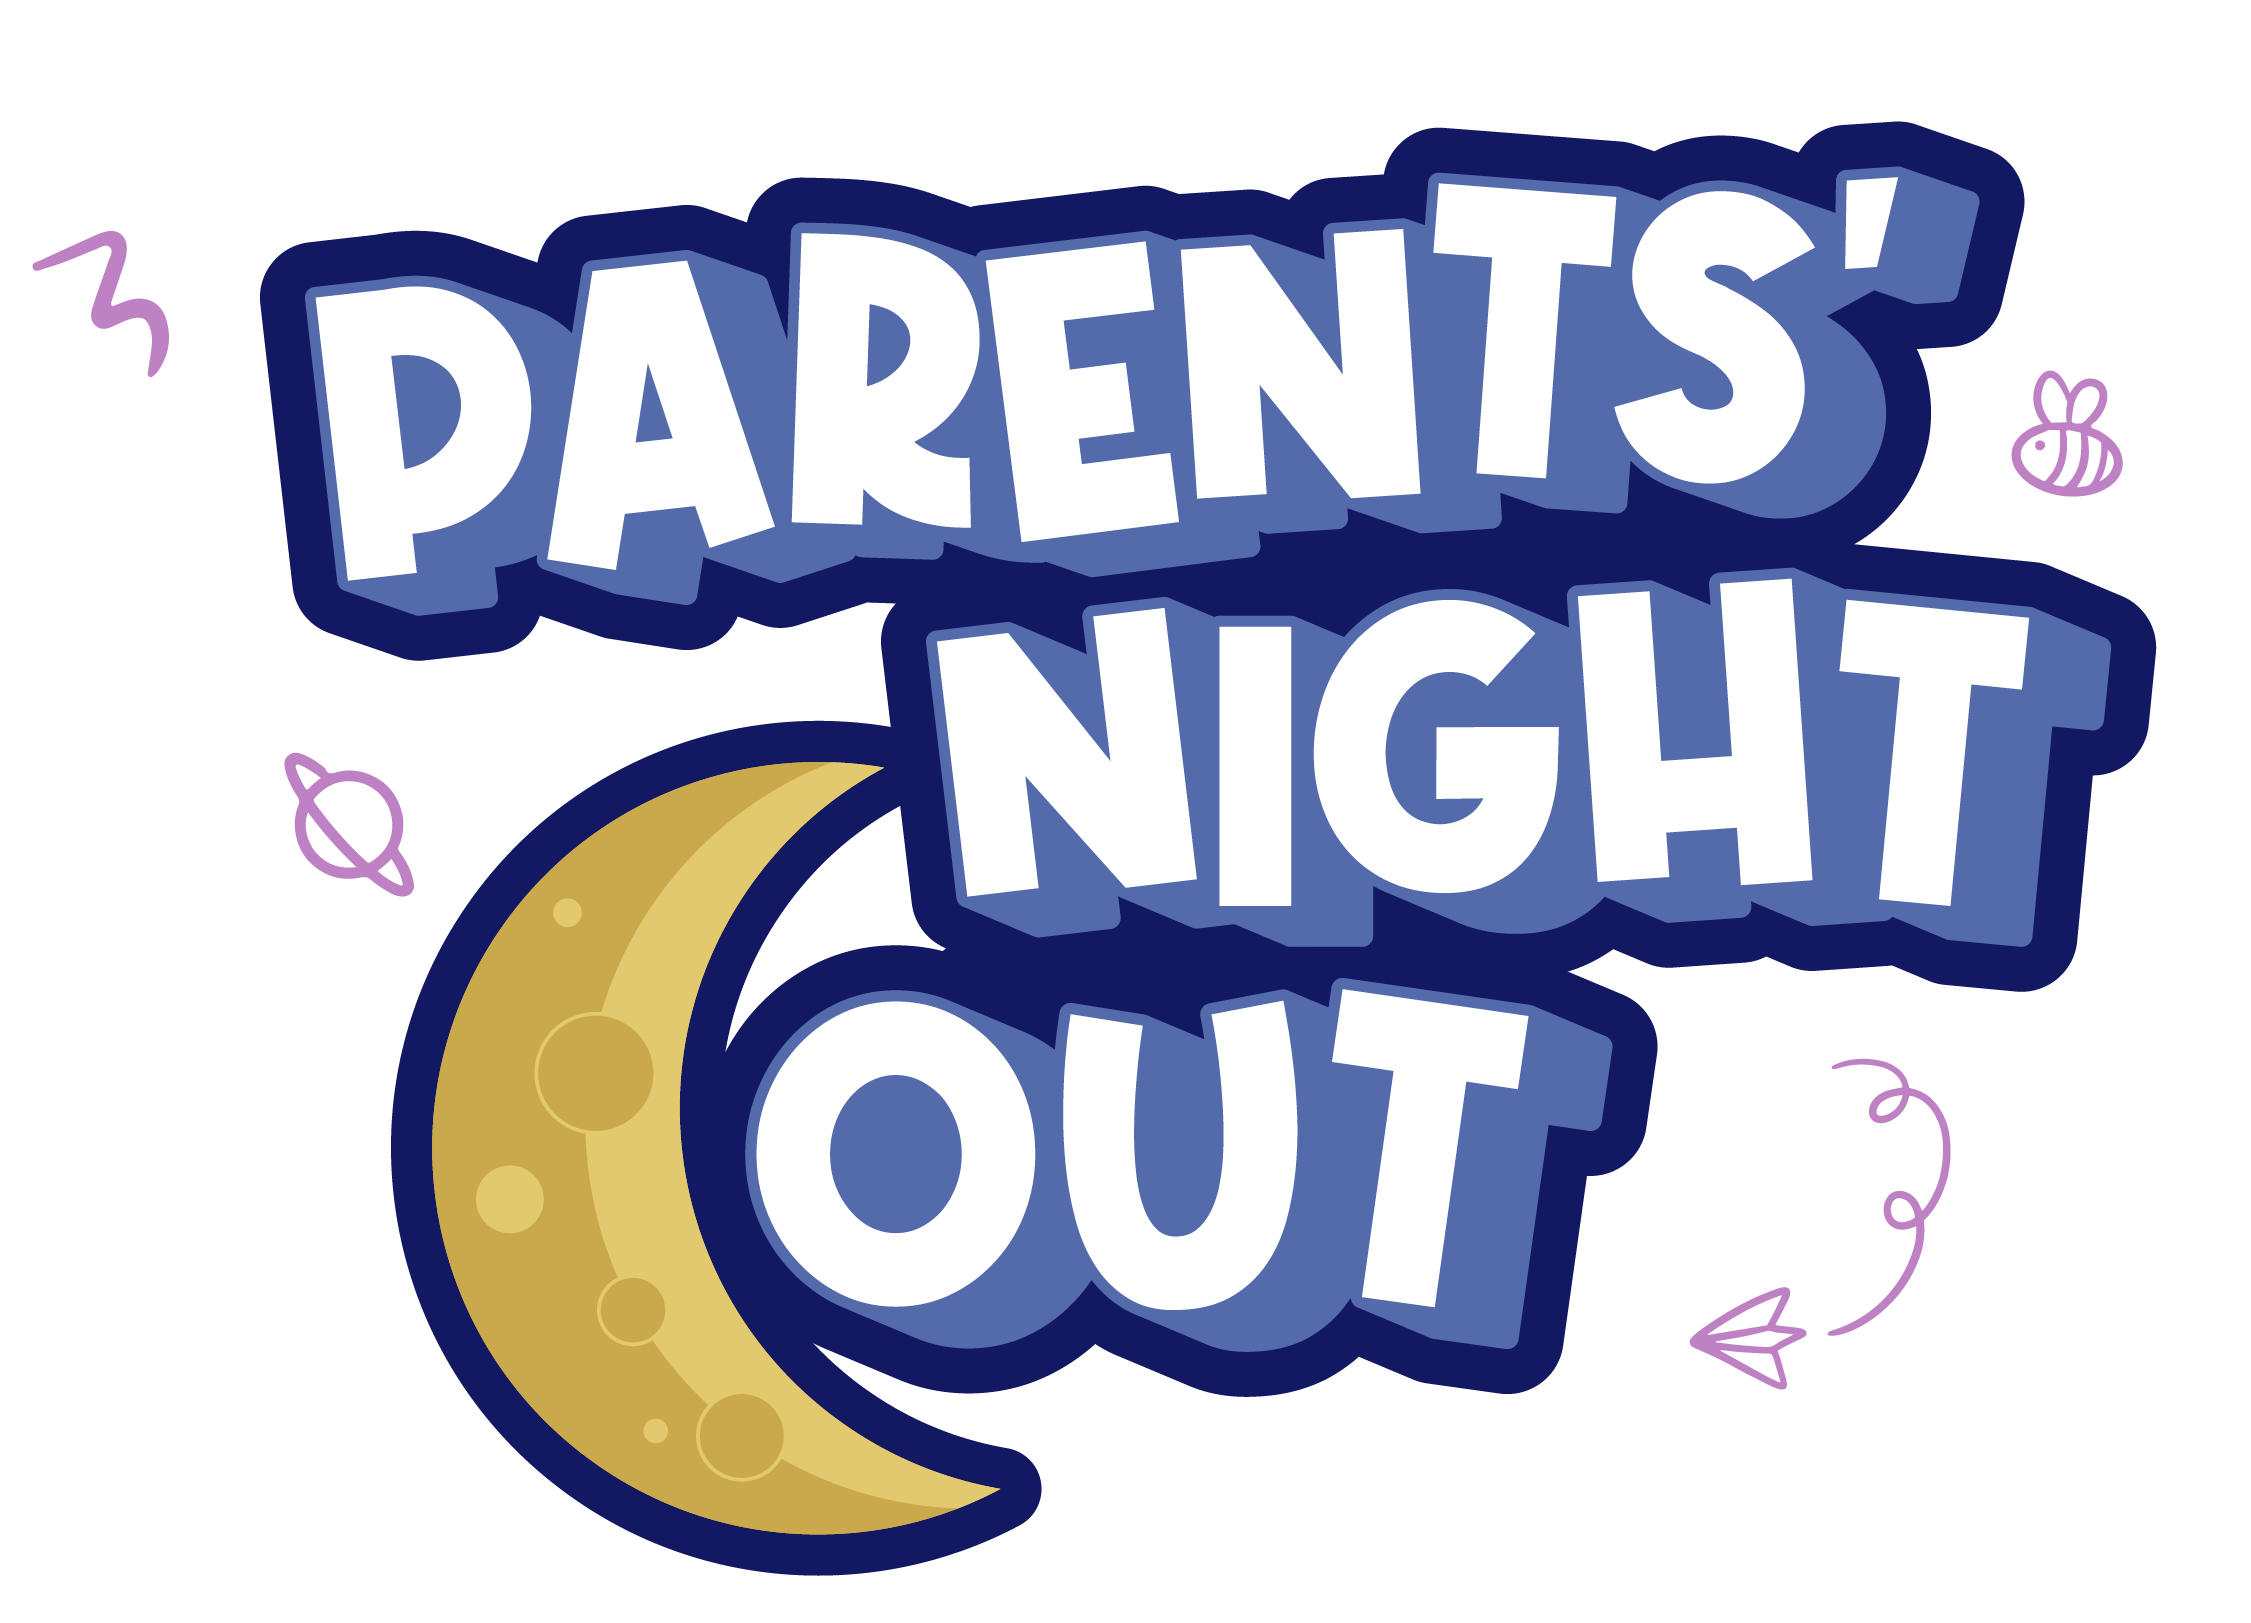 the words parents'night out are written in blue and yellow